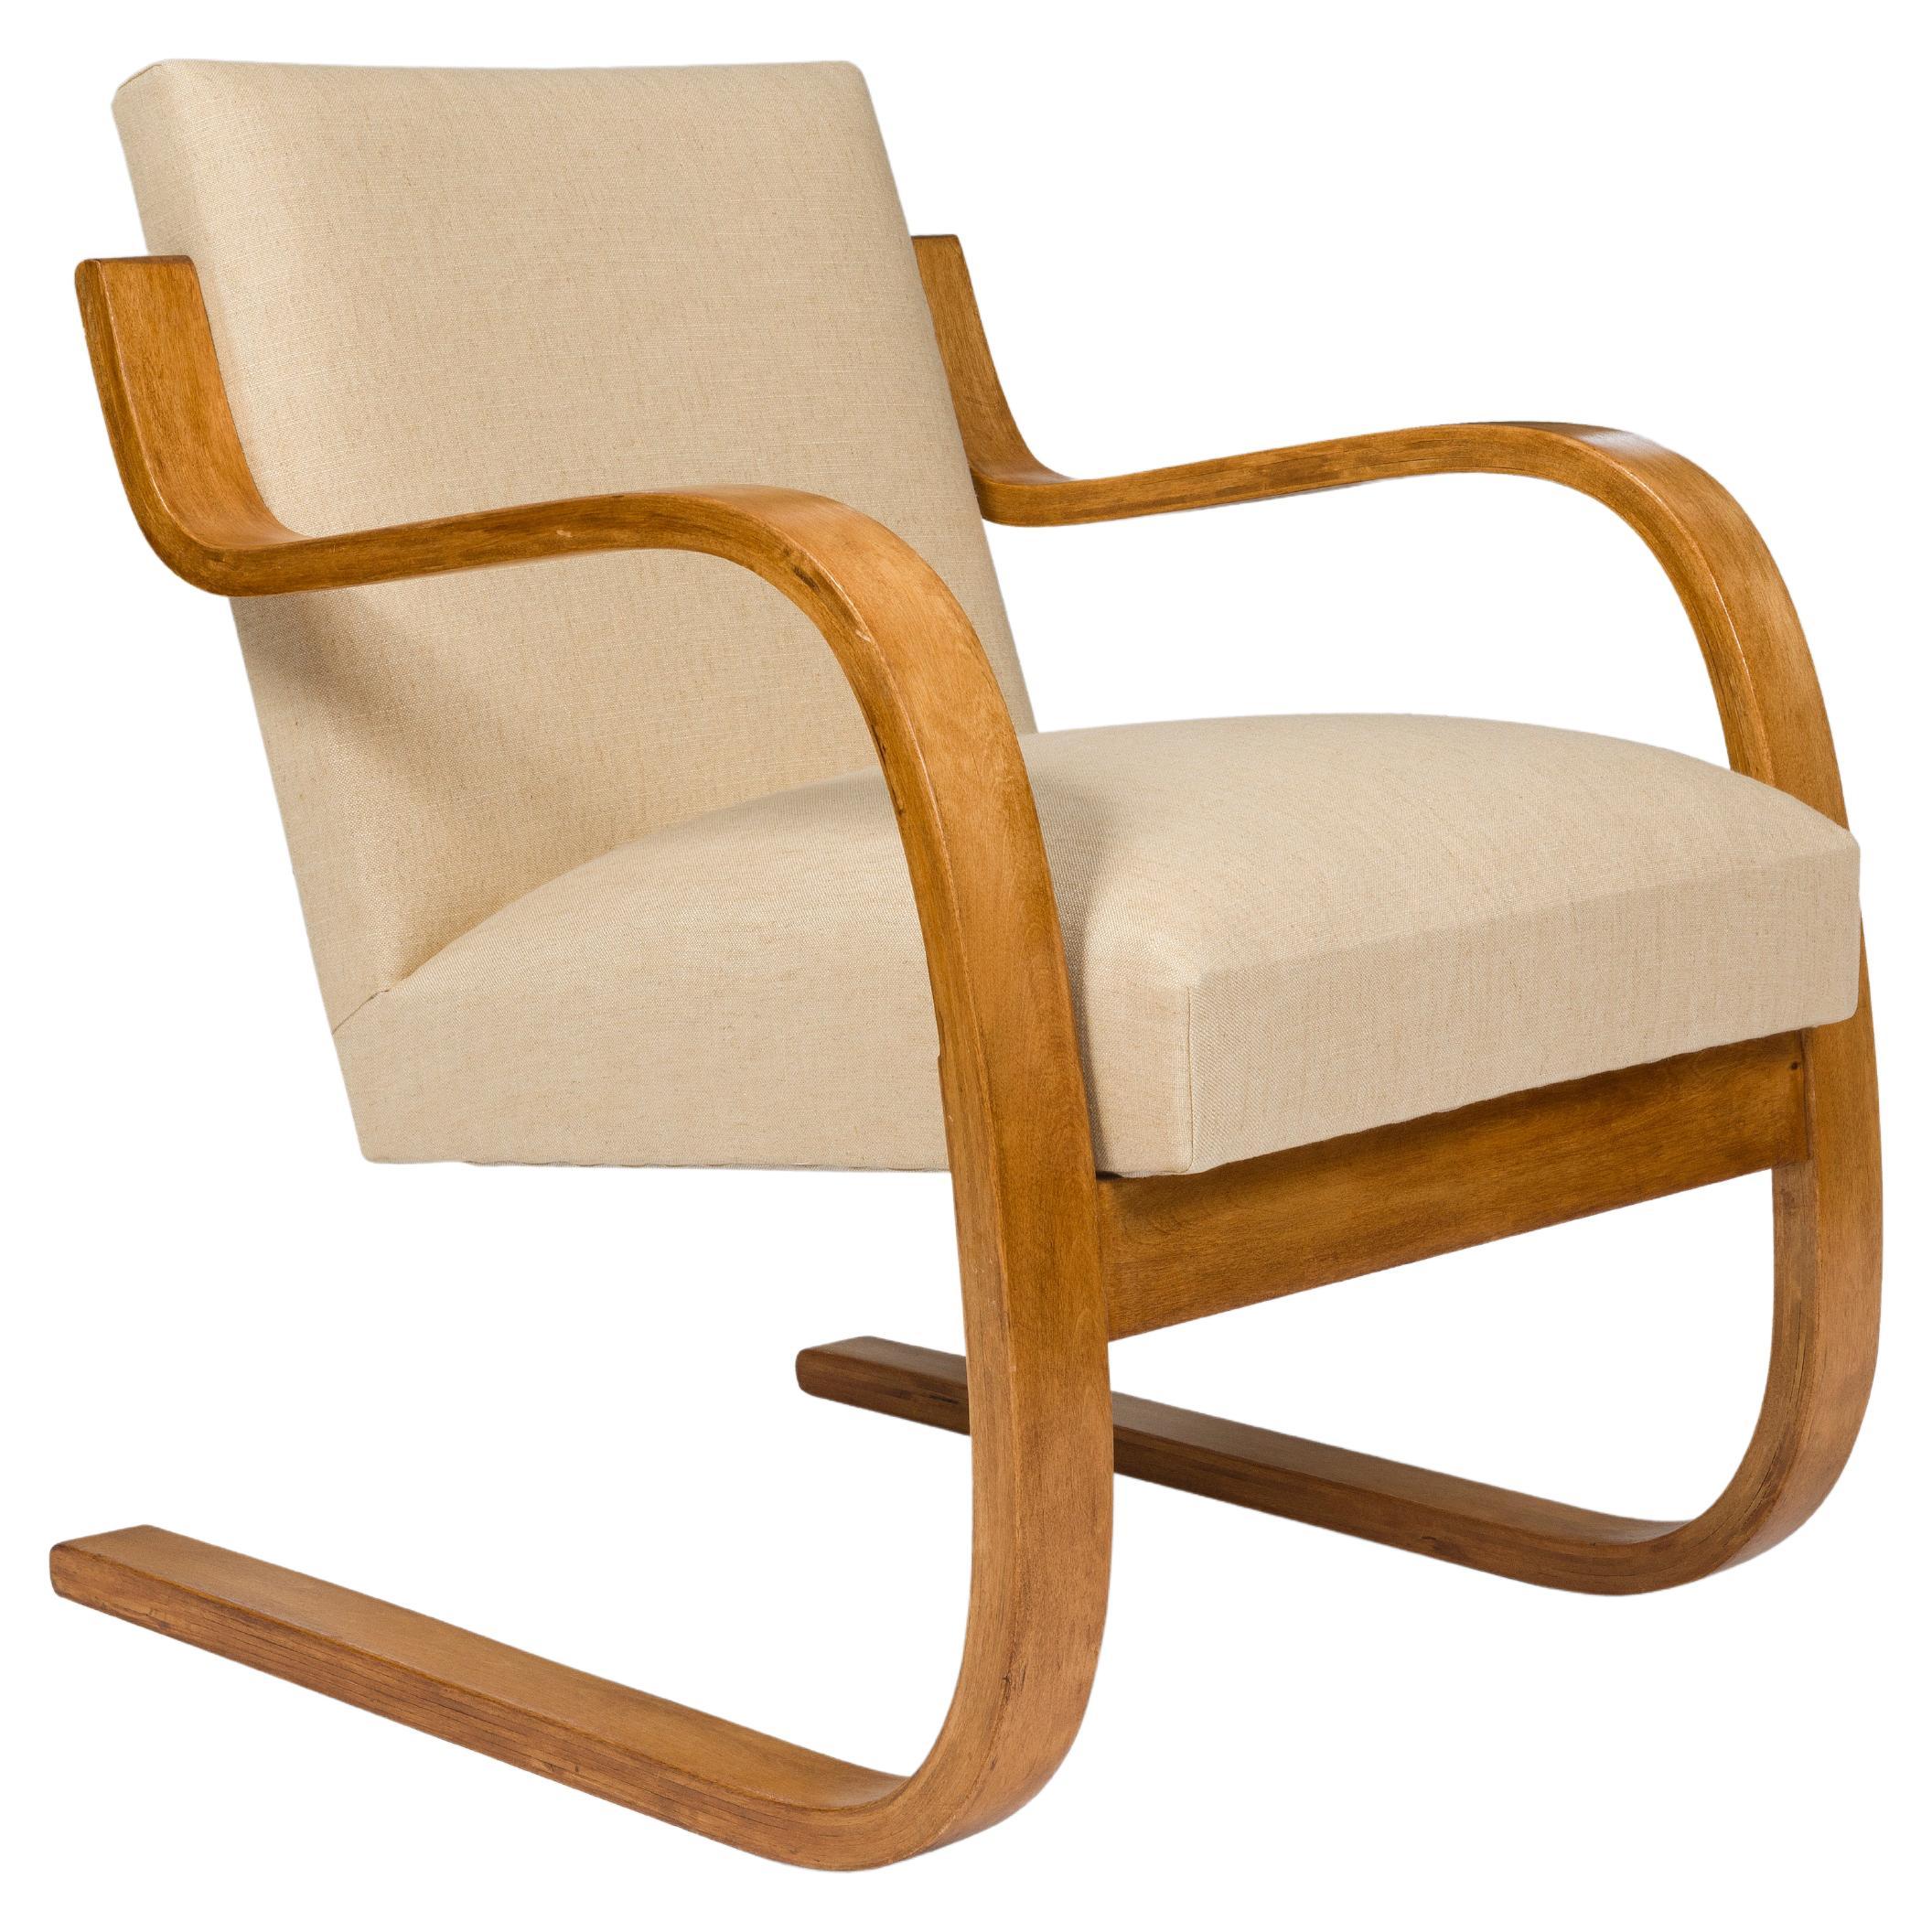 What style did Alvar Aalto use?